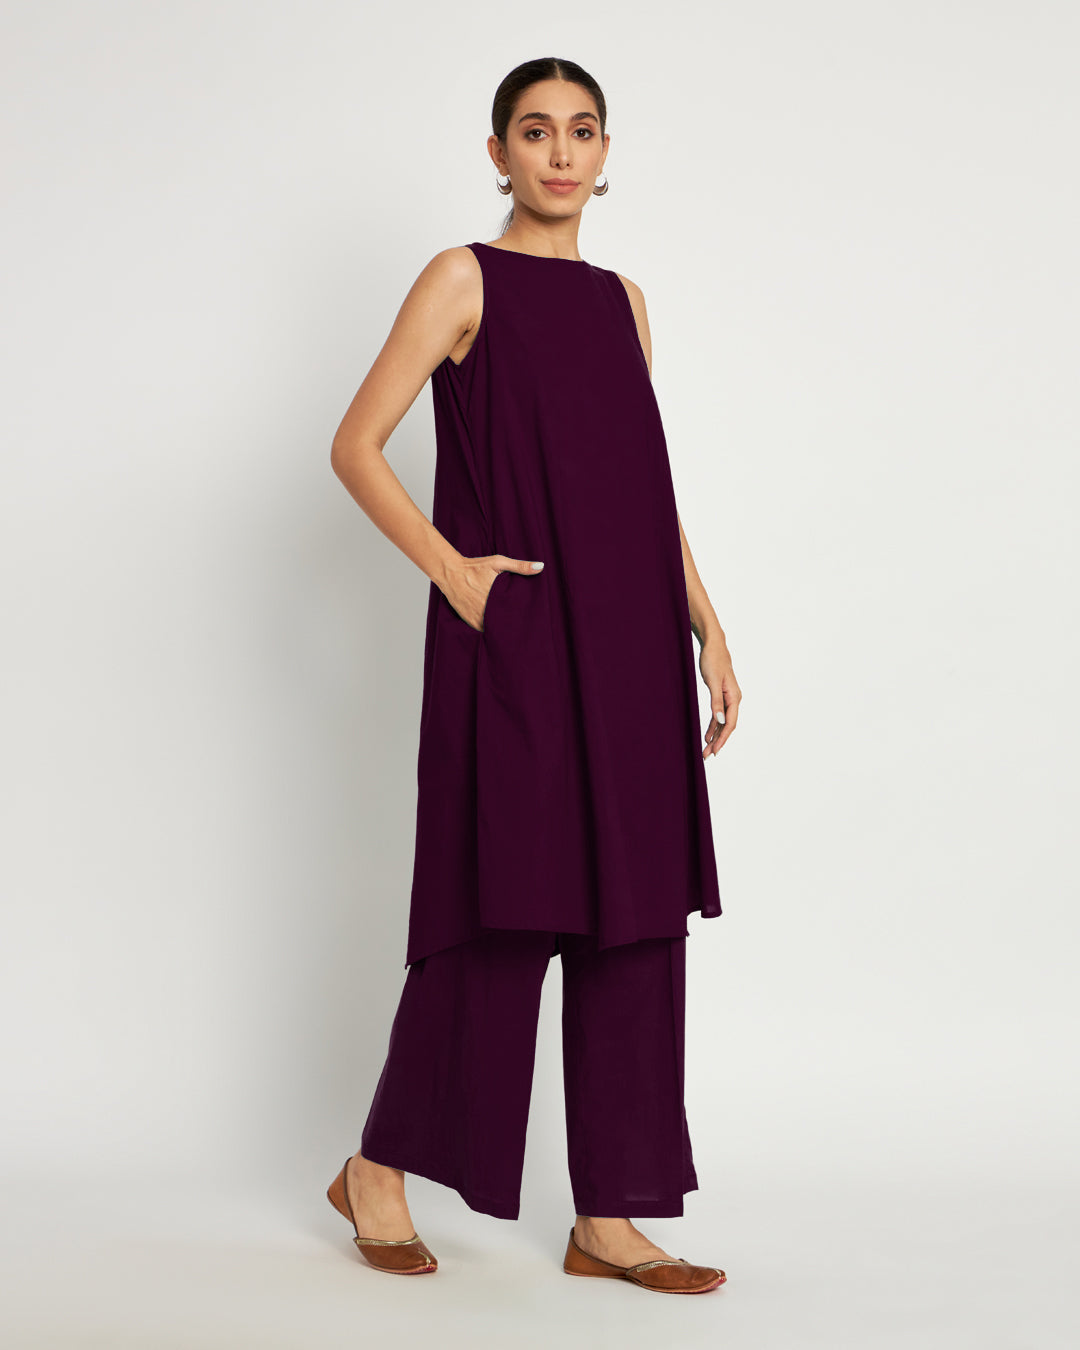 Plum Passion Sleeveless A-Line Solid Co-ord Set